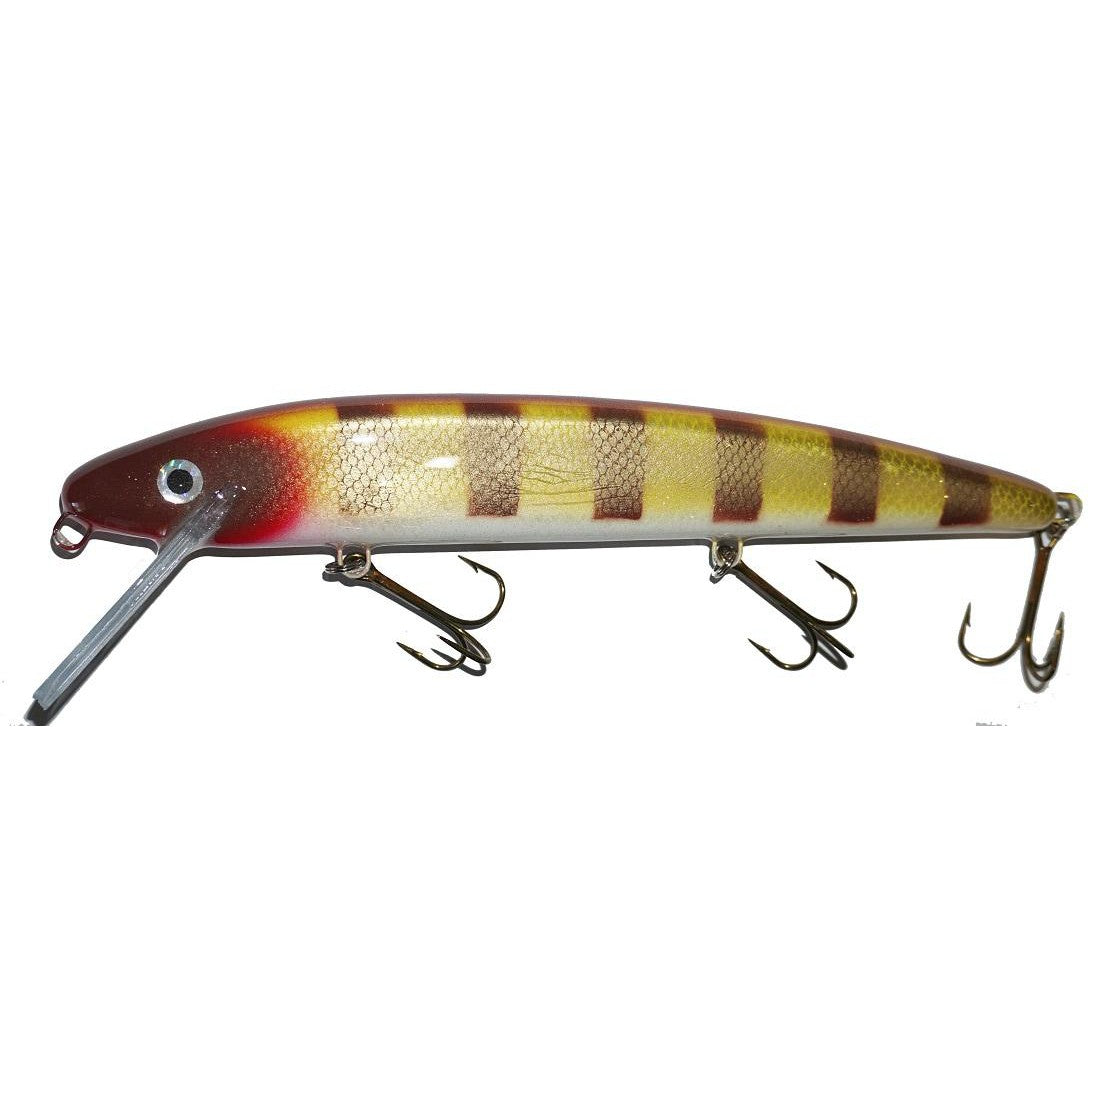 View of Crankbaits Slammer 12" Minnow Crankbait Walleye available at EZOKO Pike and Musky Shop